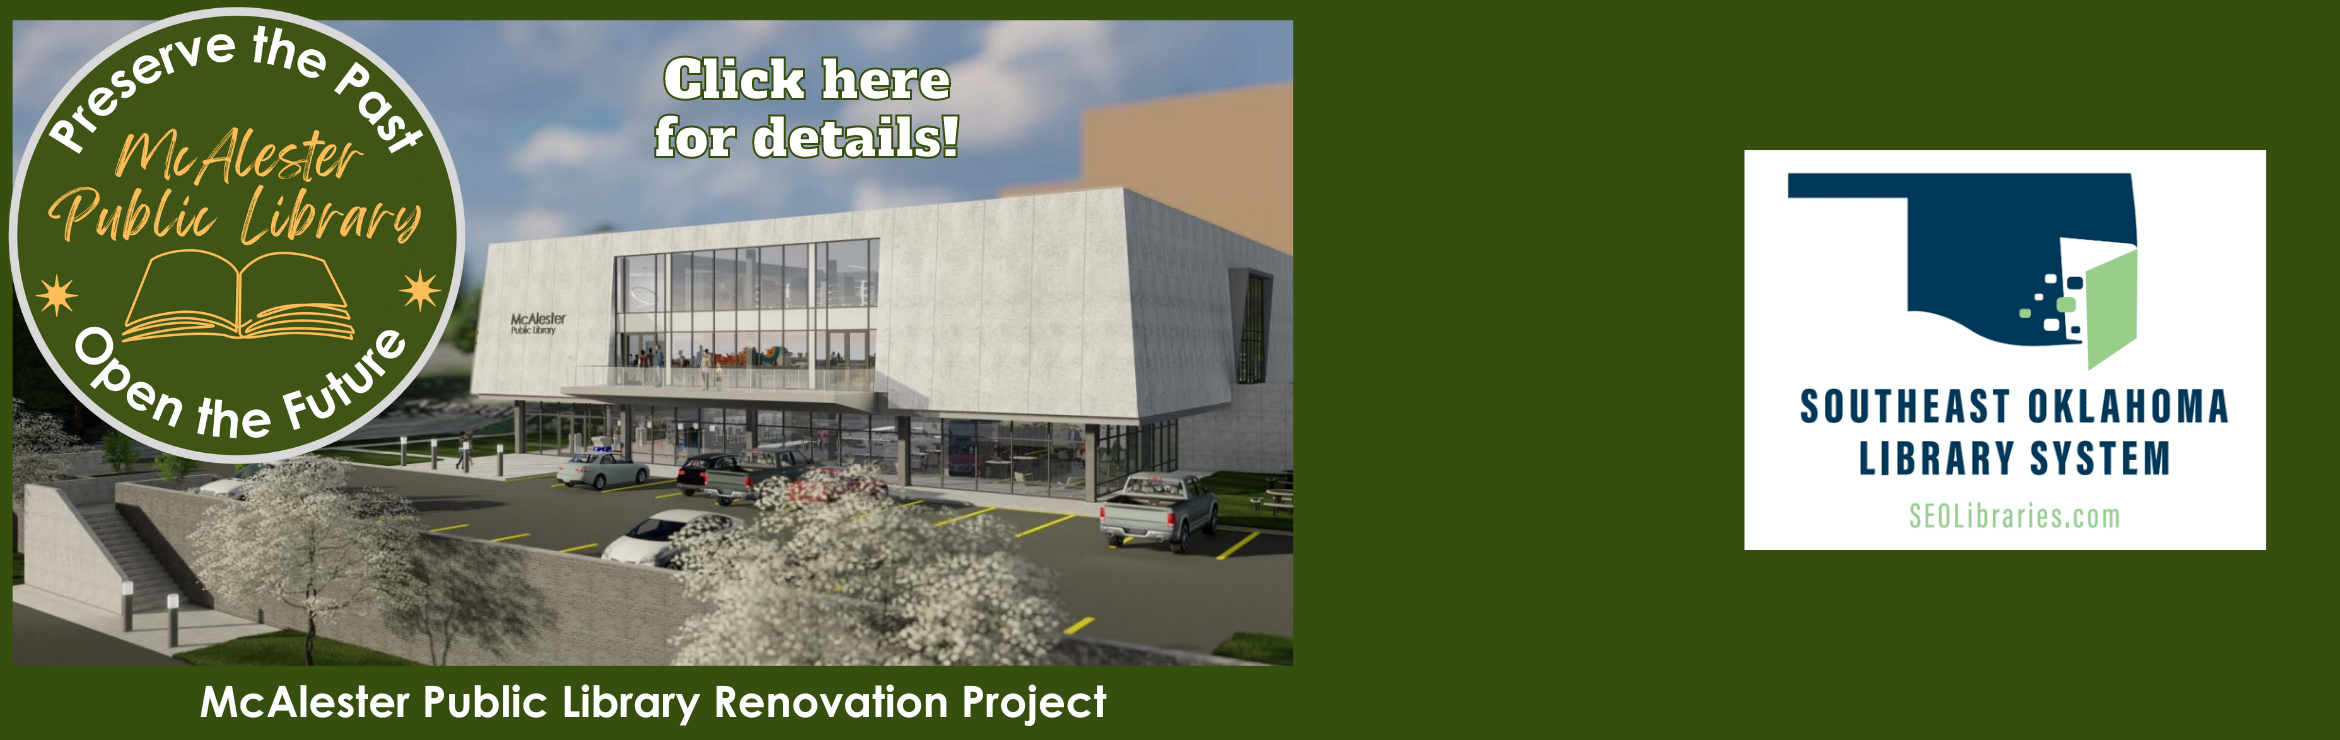 McAlester Public Library Renovation Project